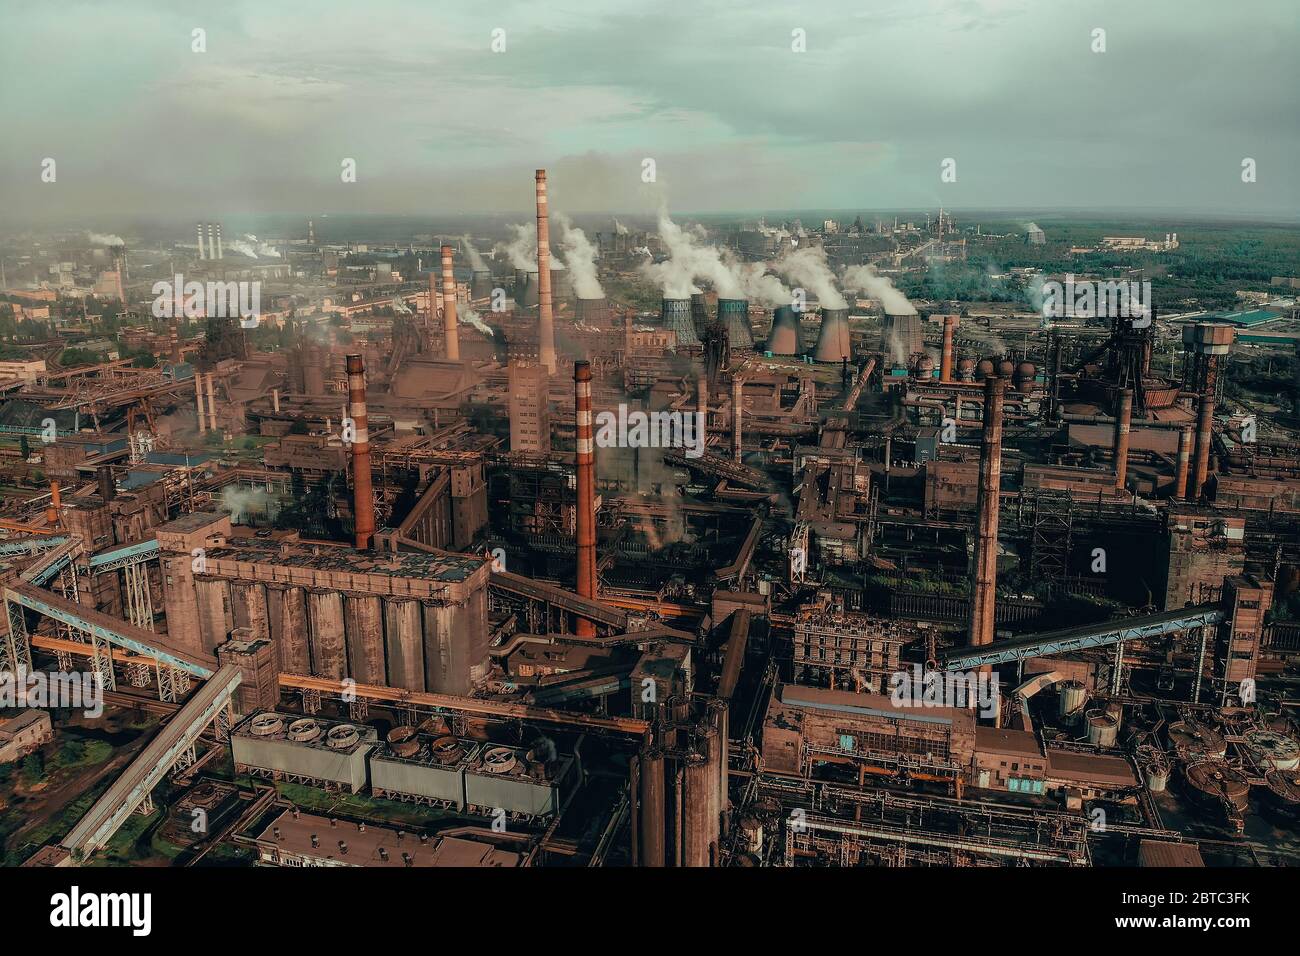 Air pollution by smoke from factory chimneys, aerial view. Industrial landscape from drone point of view. Stock Photo